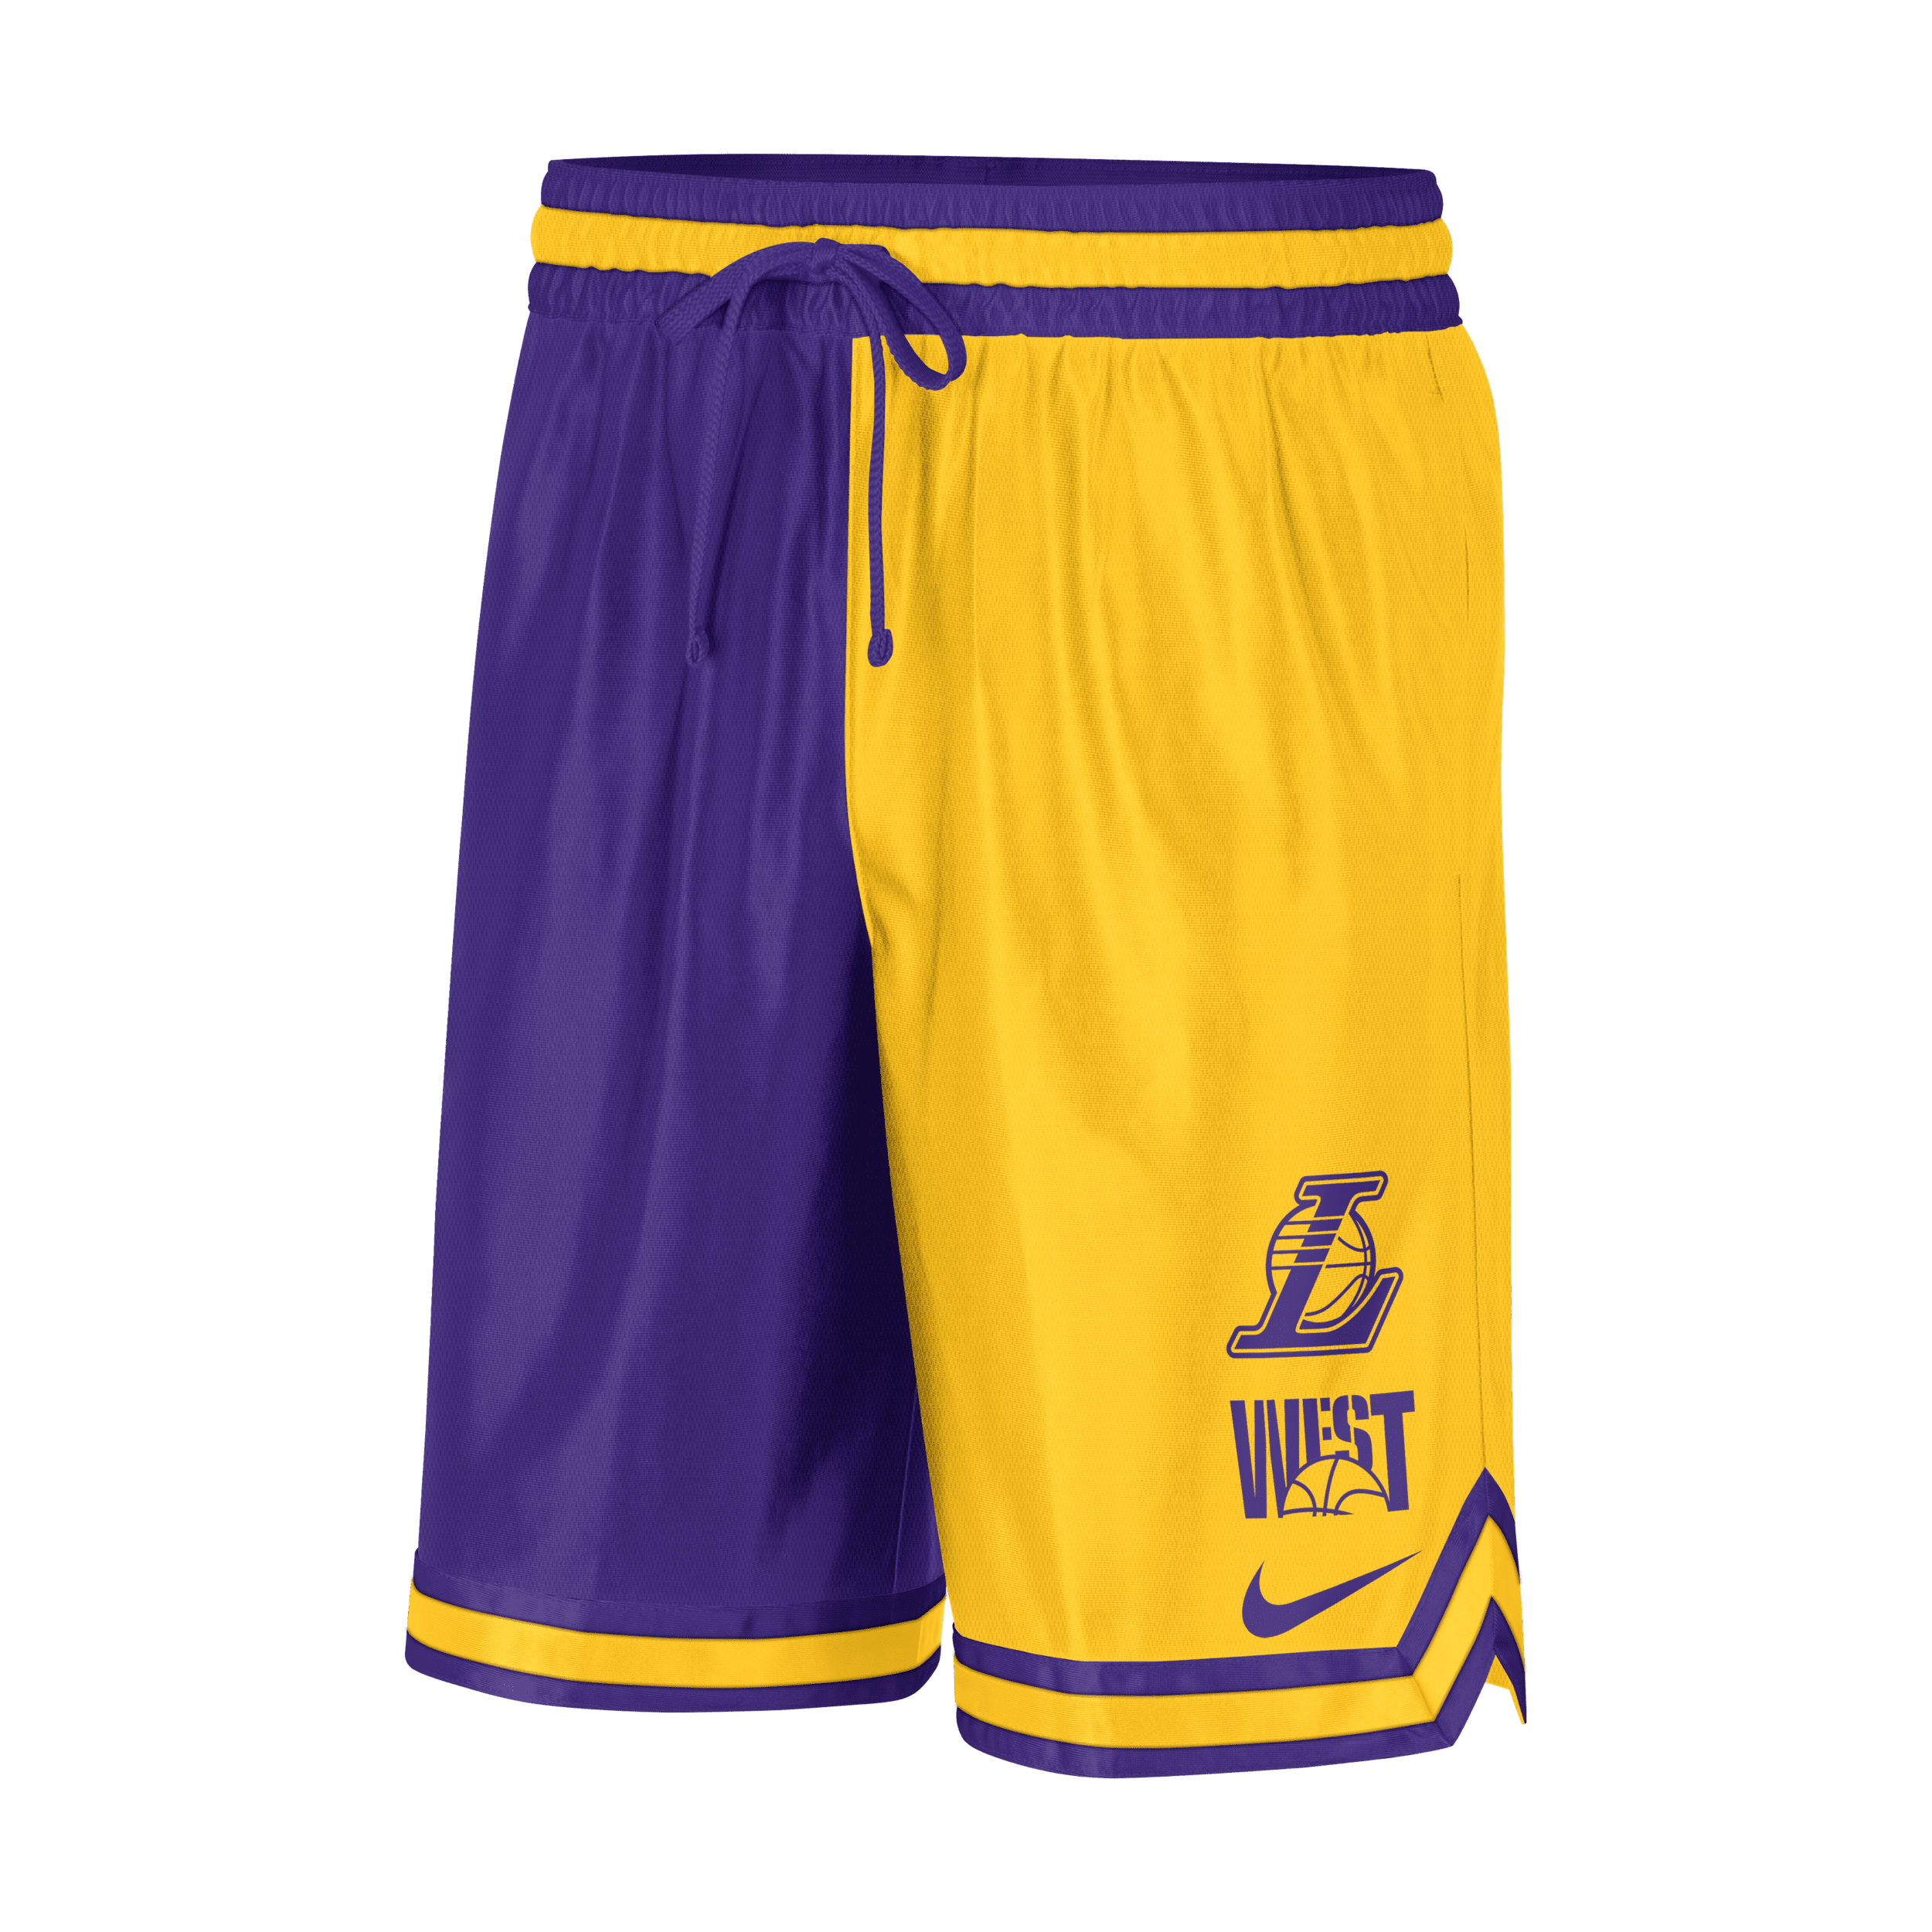 Nike Men's Los Angeles Lakers Courtside DNA Shorts - Yellow - M Each